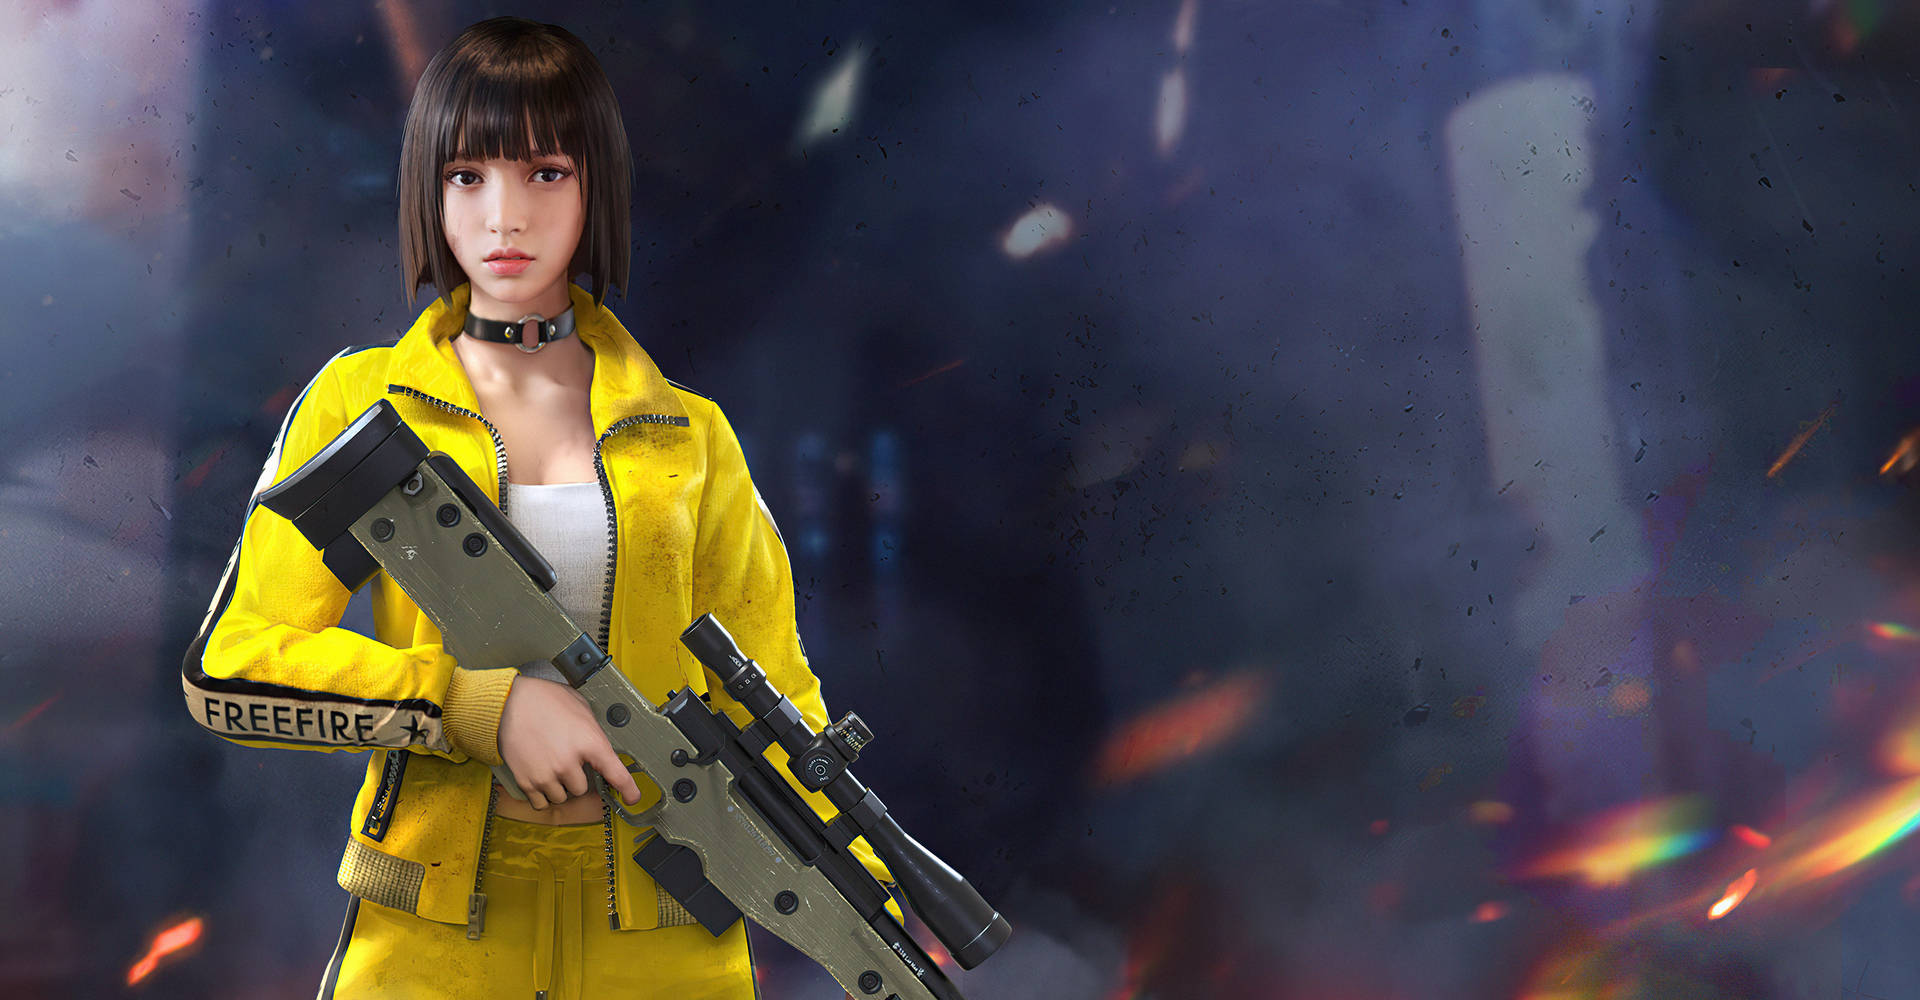 4k Free Fire Character Kelly Rifle Background